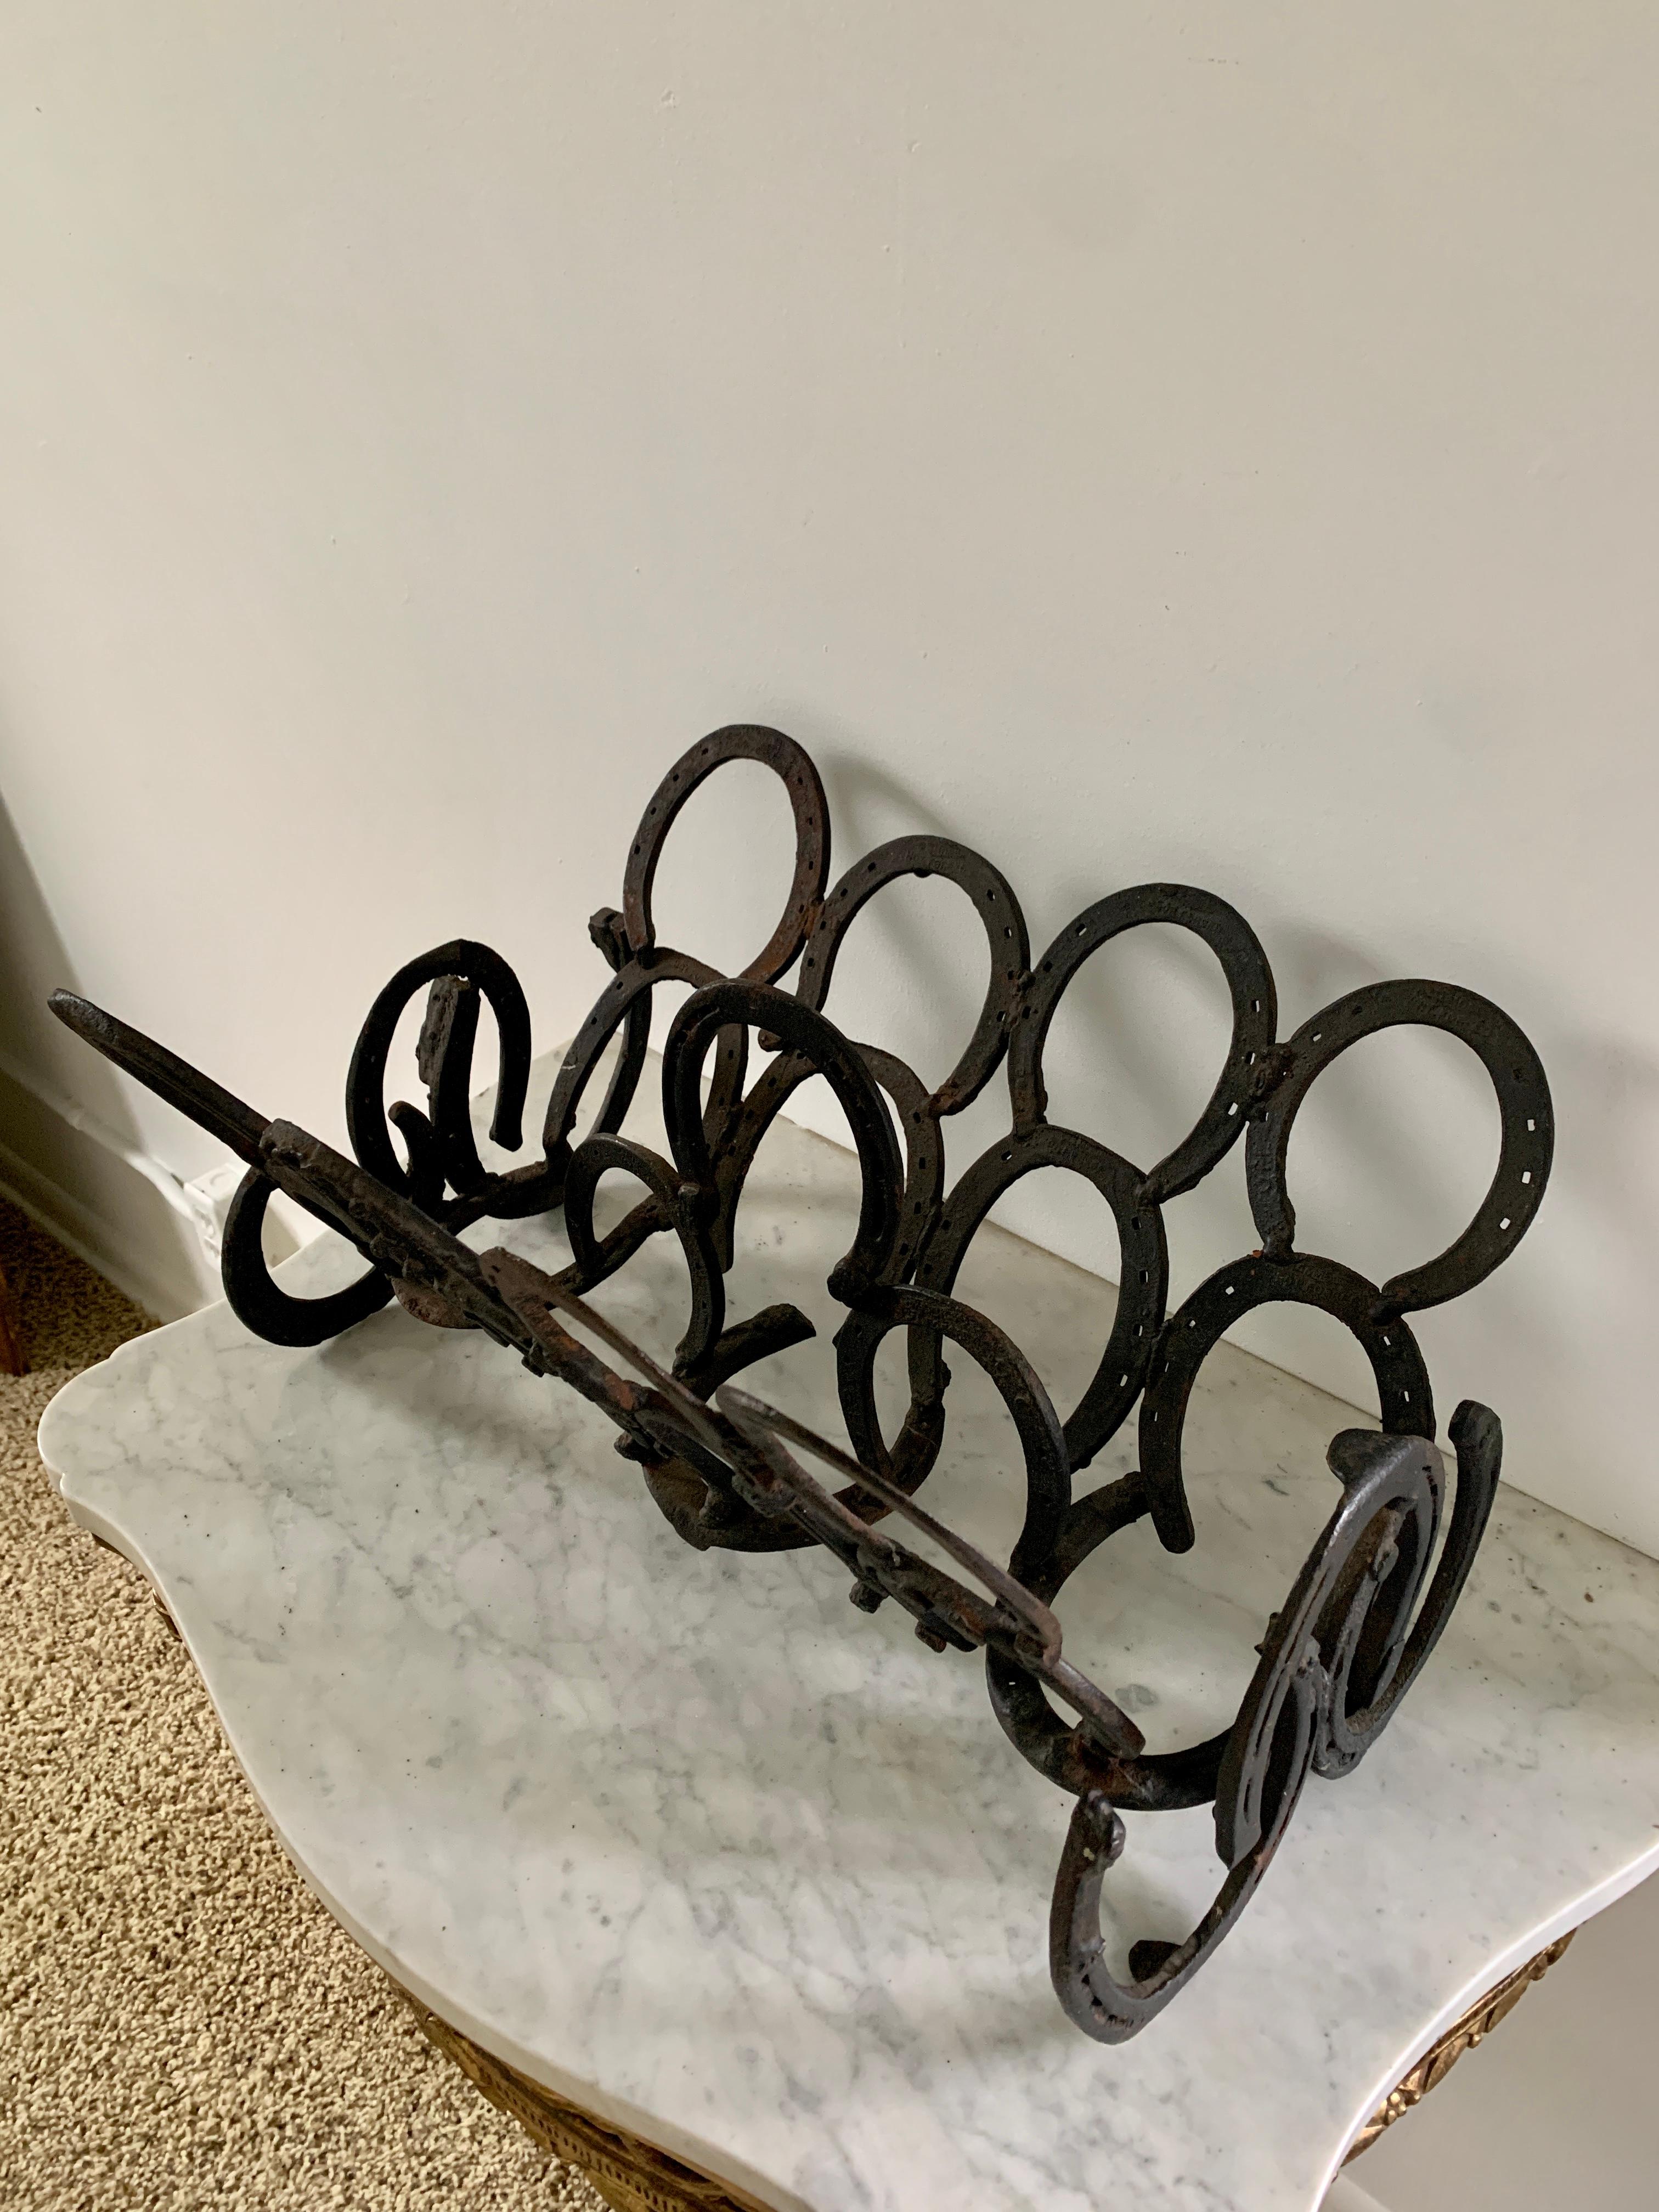 A stunning vintage hand-forged cast iron equestrian, farmhouse, or rustic horseshoe magazine rack or book stand

USA, Mid-20th Century

Measures: 20.25